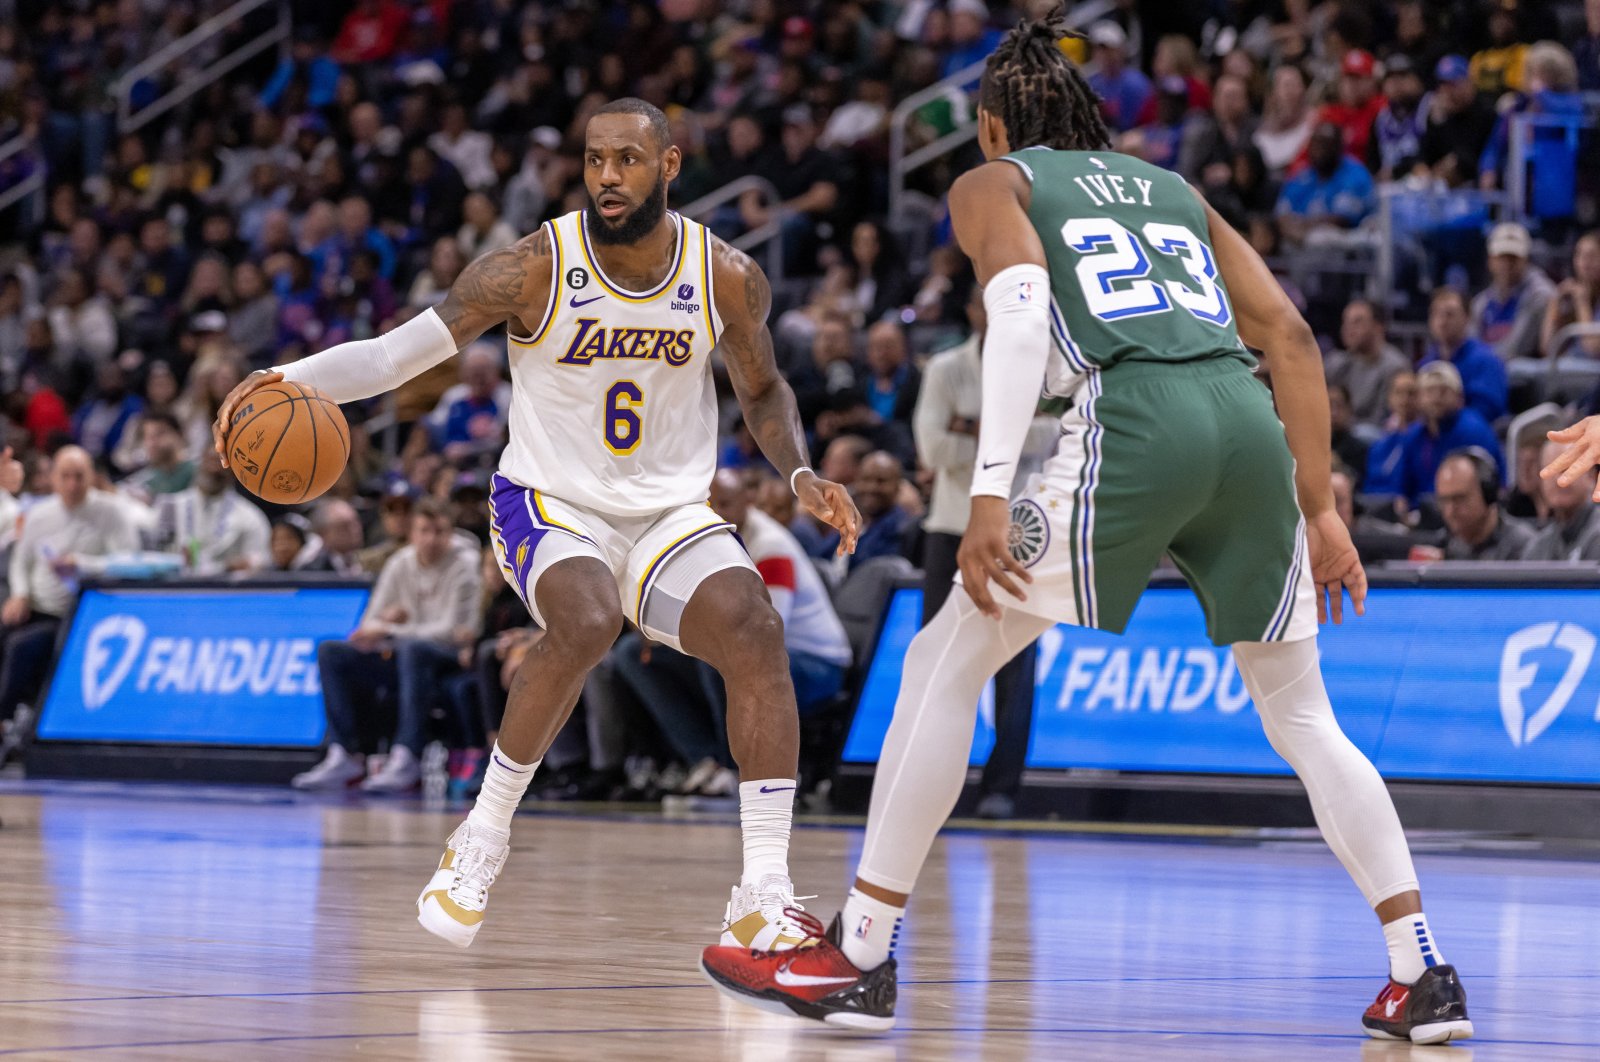 Los Angeles Lakers forward LeBron James (6) controls the ball in front of Detroit Pistons guard Jaden Ivey (23) during the second half at Little Caesars Arena, Detroit, Michigan, U.S., Dec 11, 2022. (Reuters Photo)